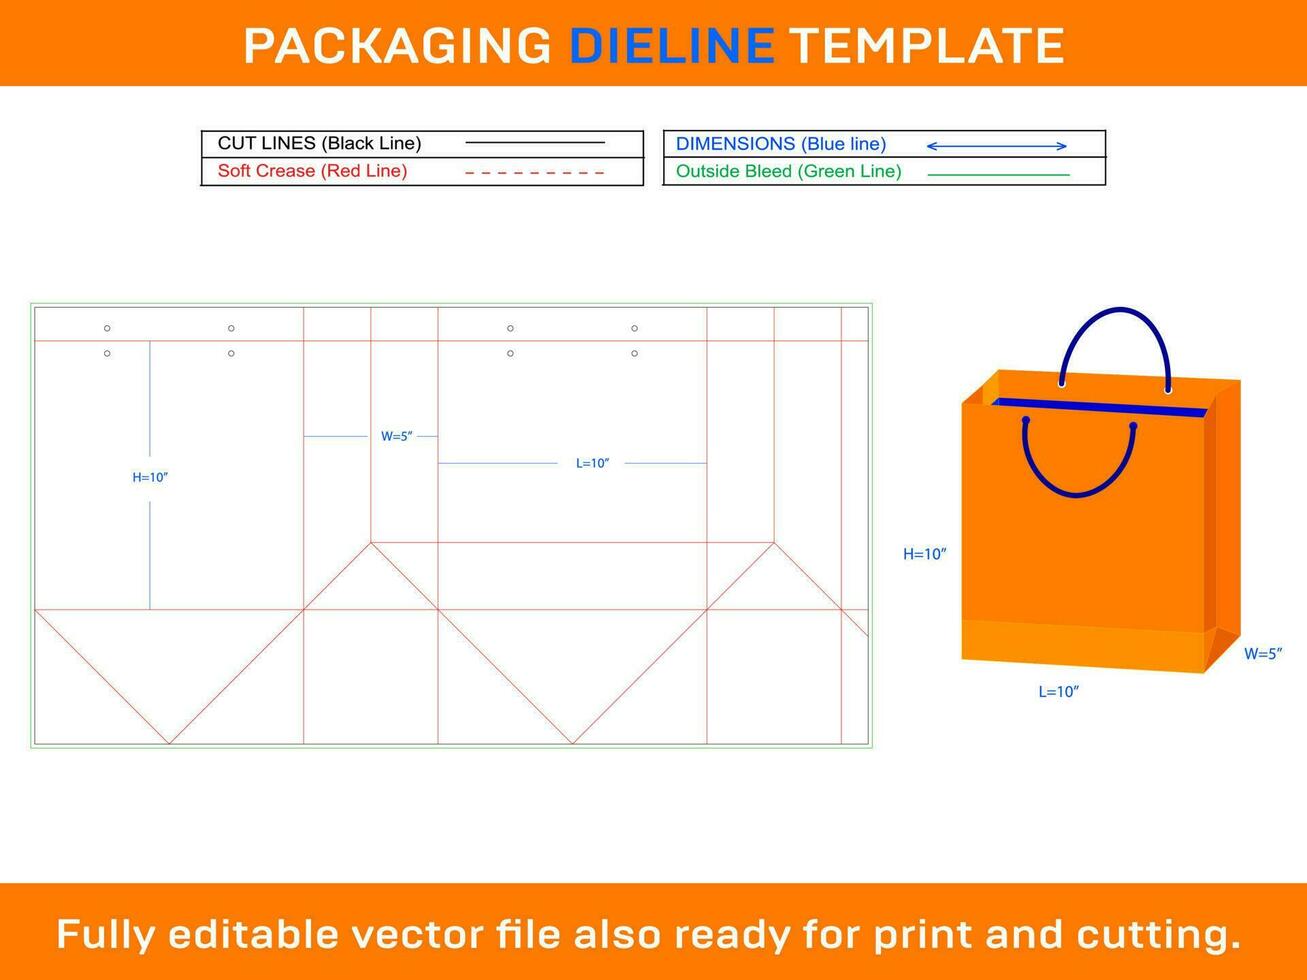 Shopping Bag Dieline Template 10x5x10 inch vector